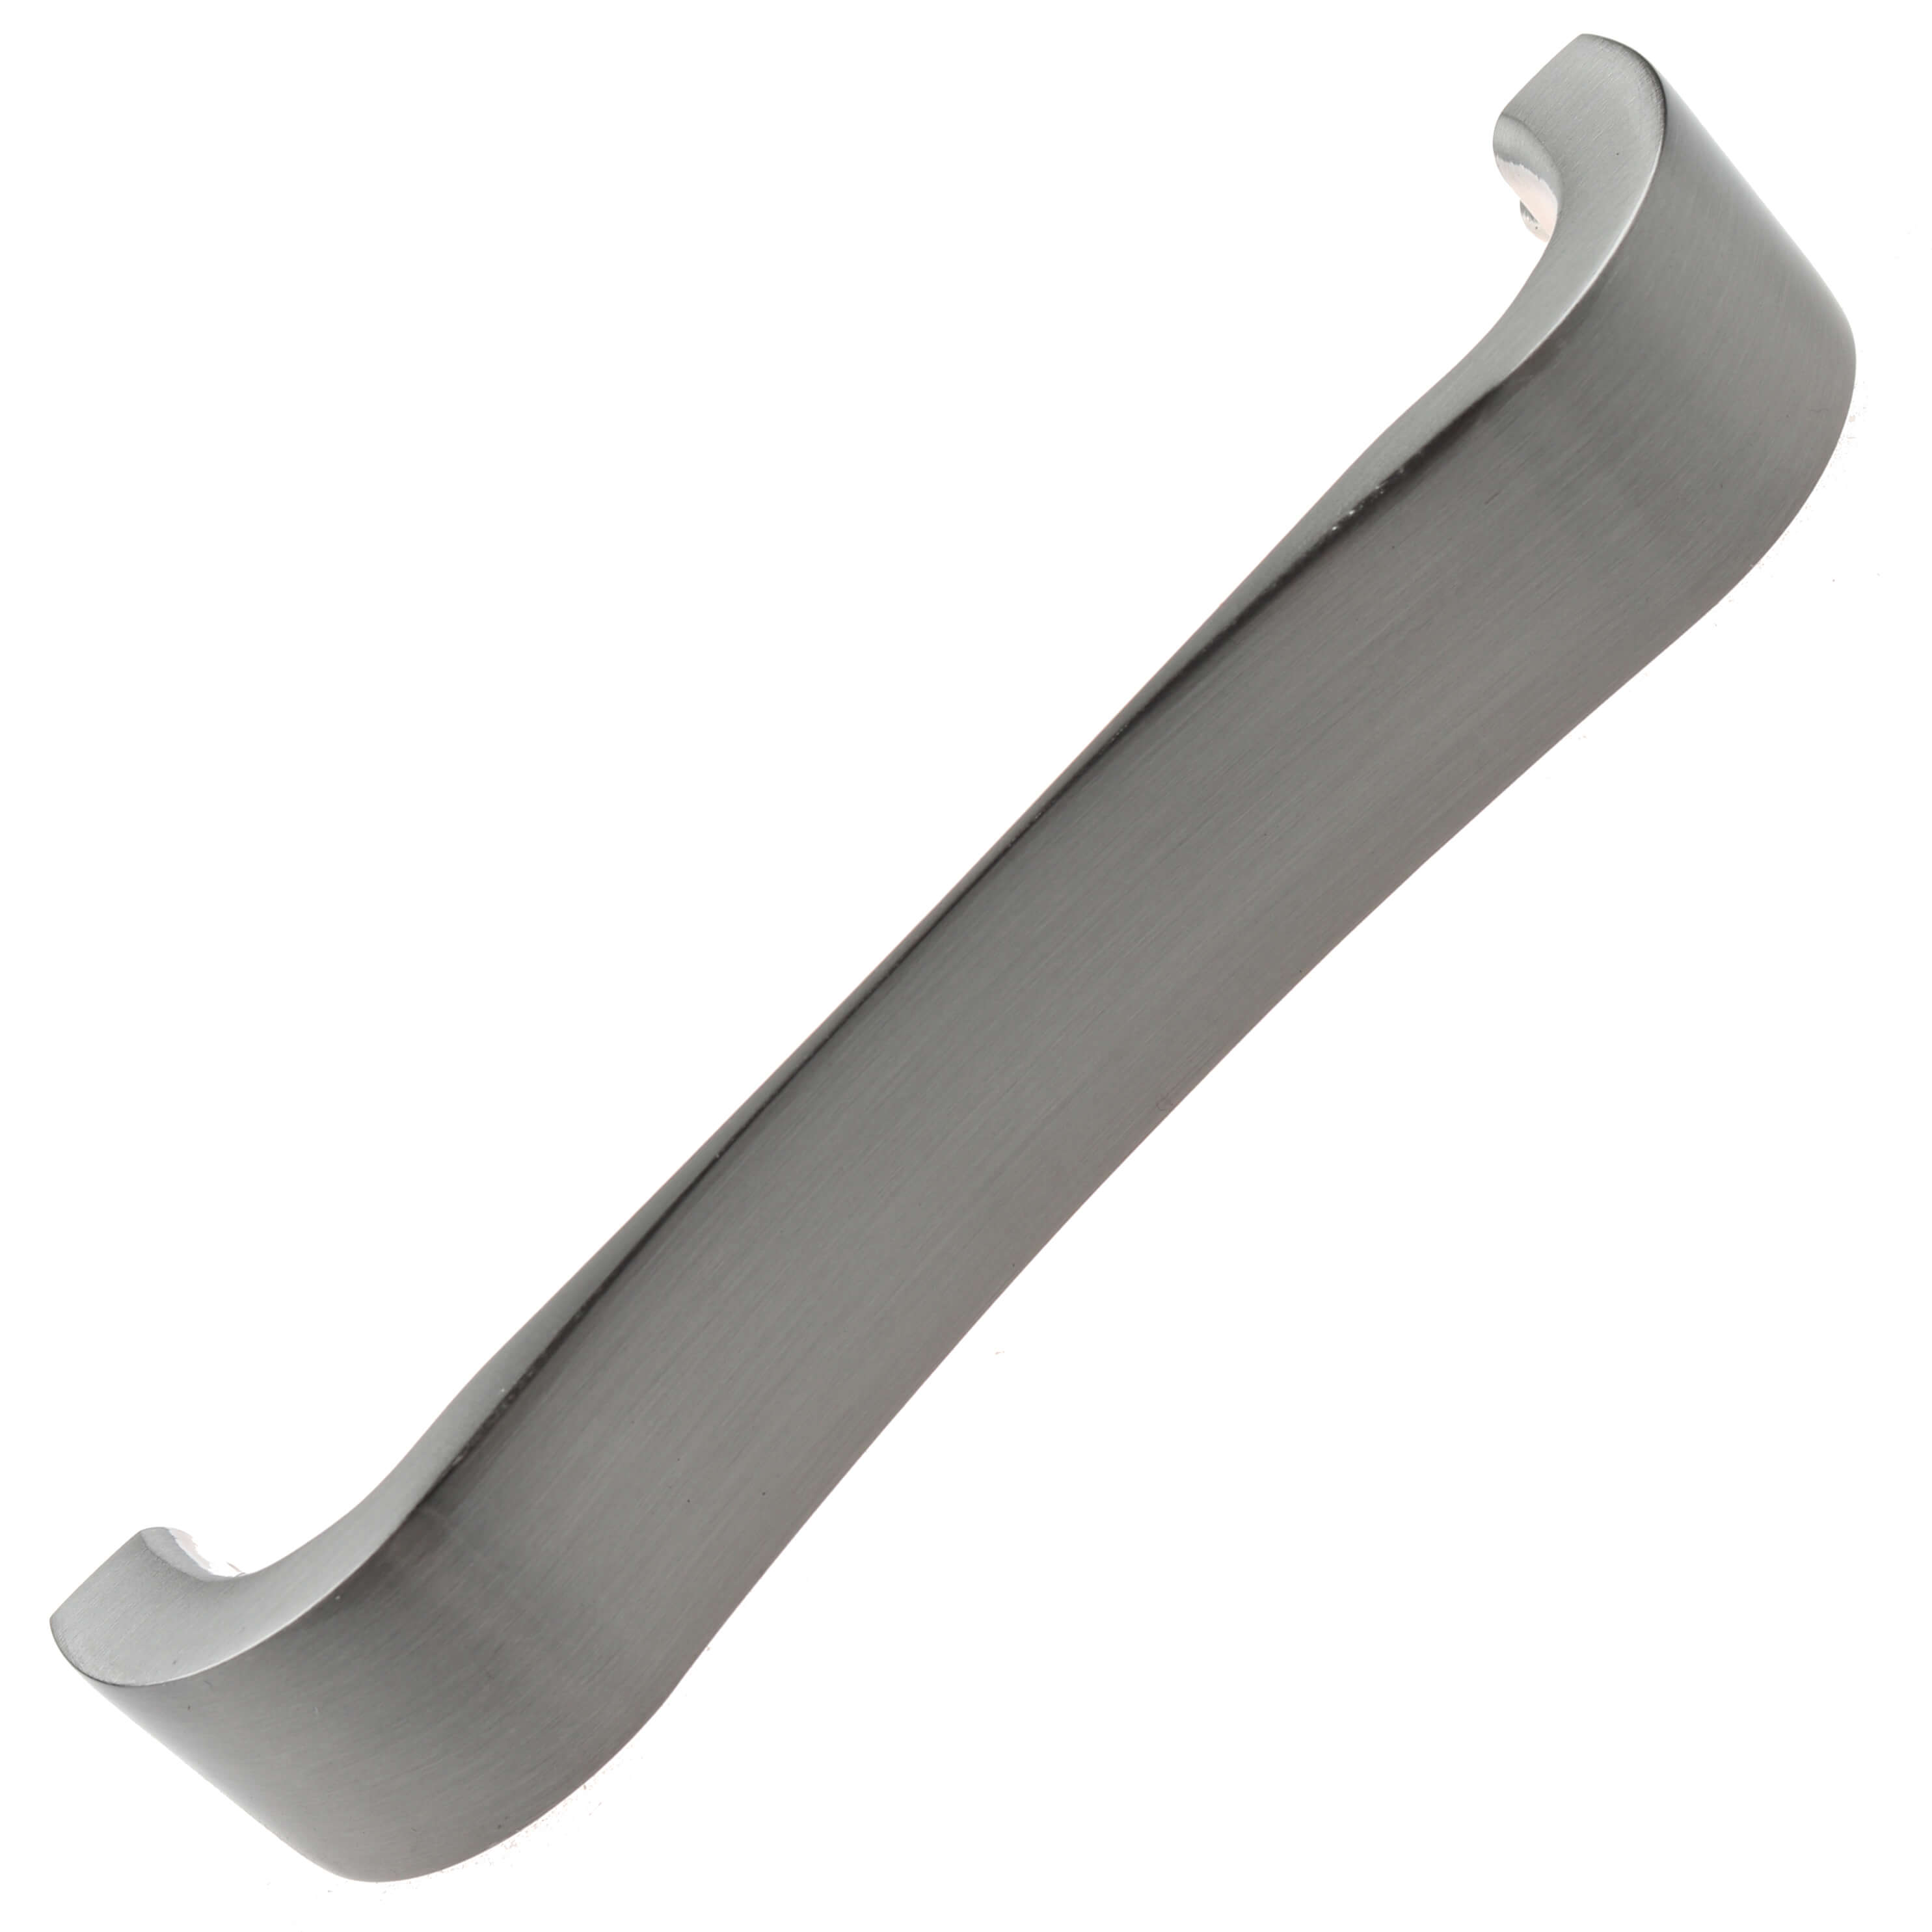 4-1/2 in. Center Smooth Curved Flat Cabinet Pull Handles, Satin Nickel, Pack of 10 - image 1 of 3